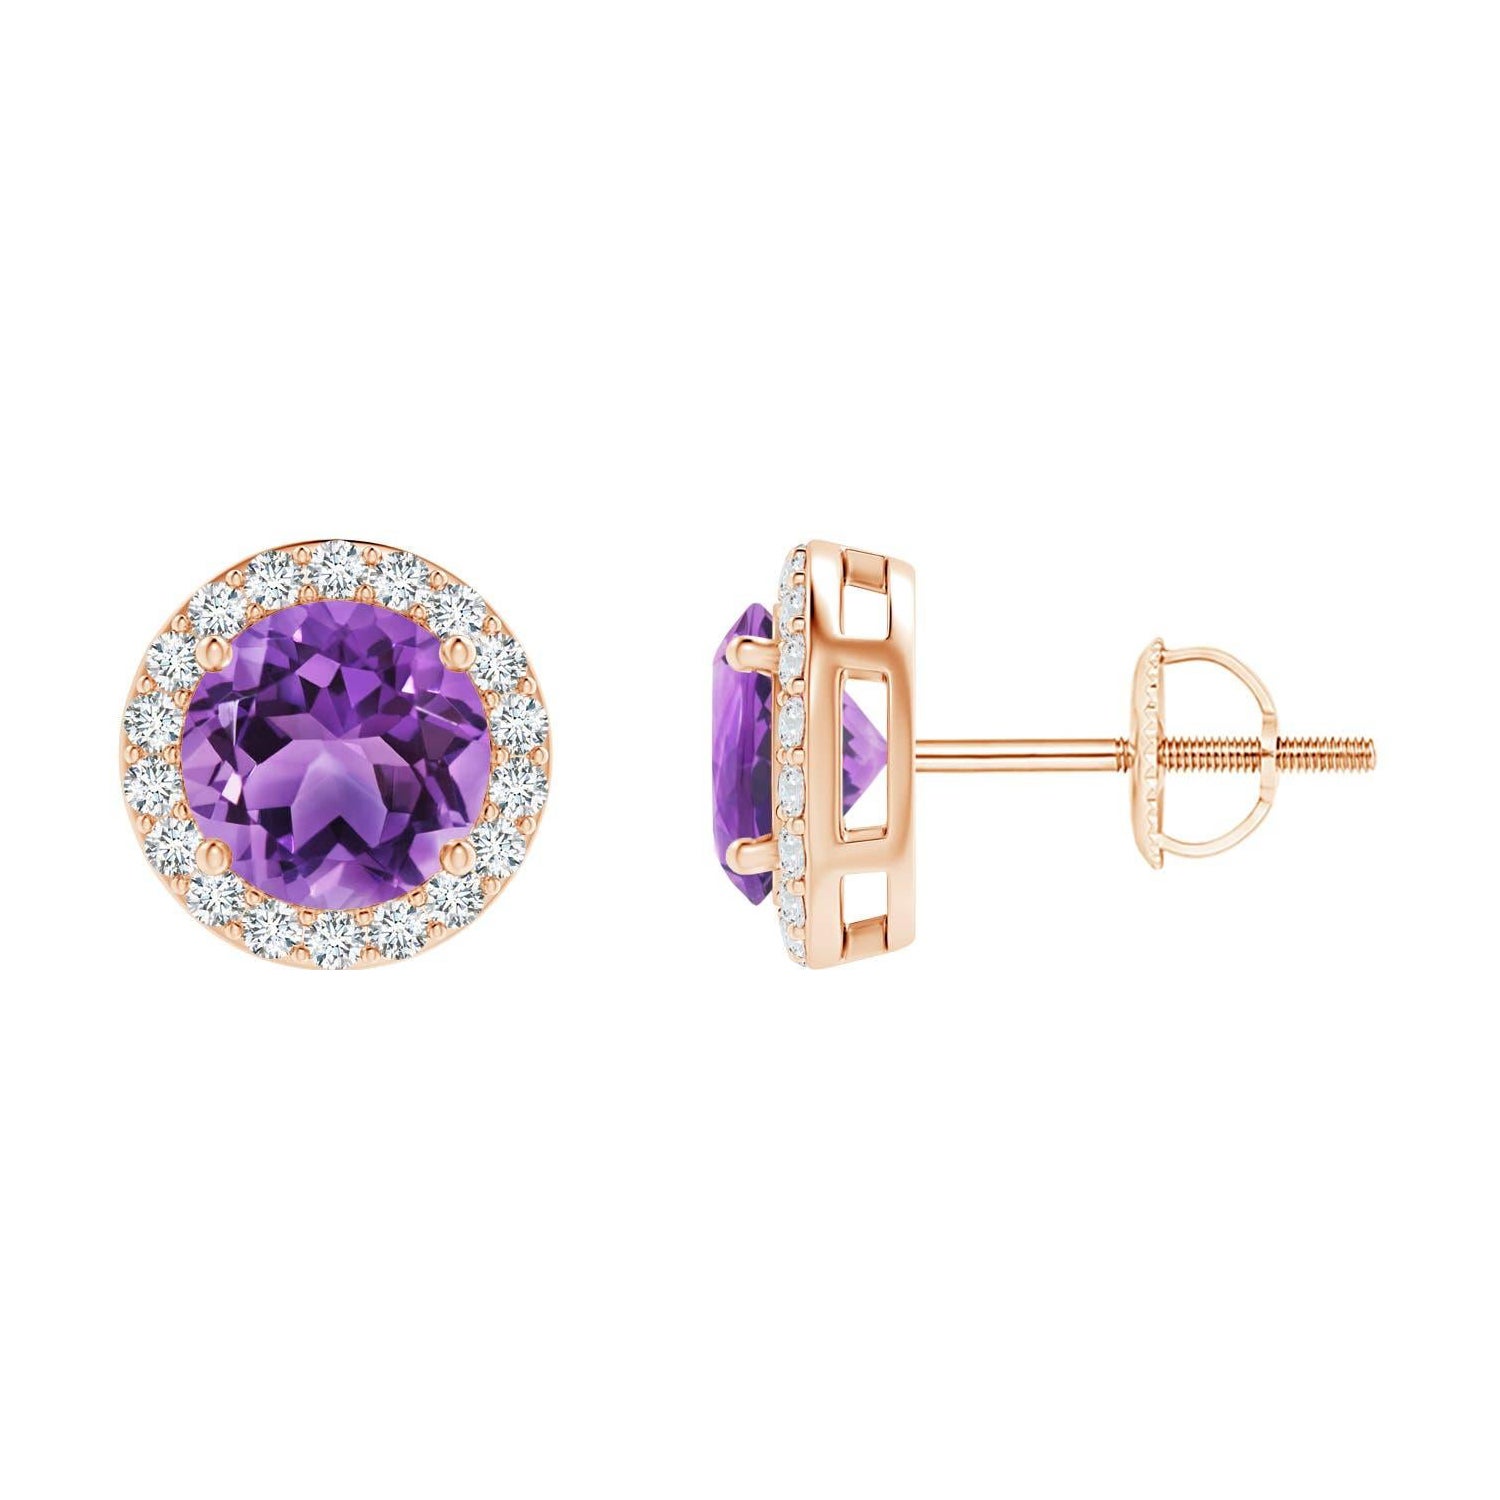 Natural Vintage Round 1.6ct Amethyst Halo Stud Earrings in 14K Rose Gold